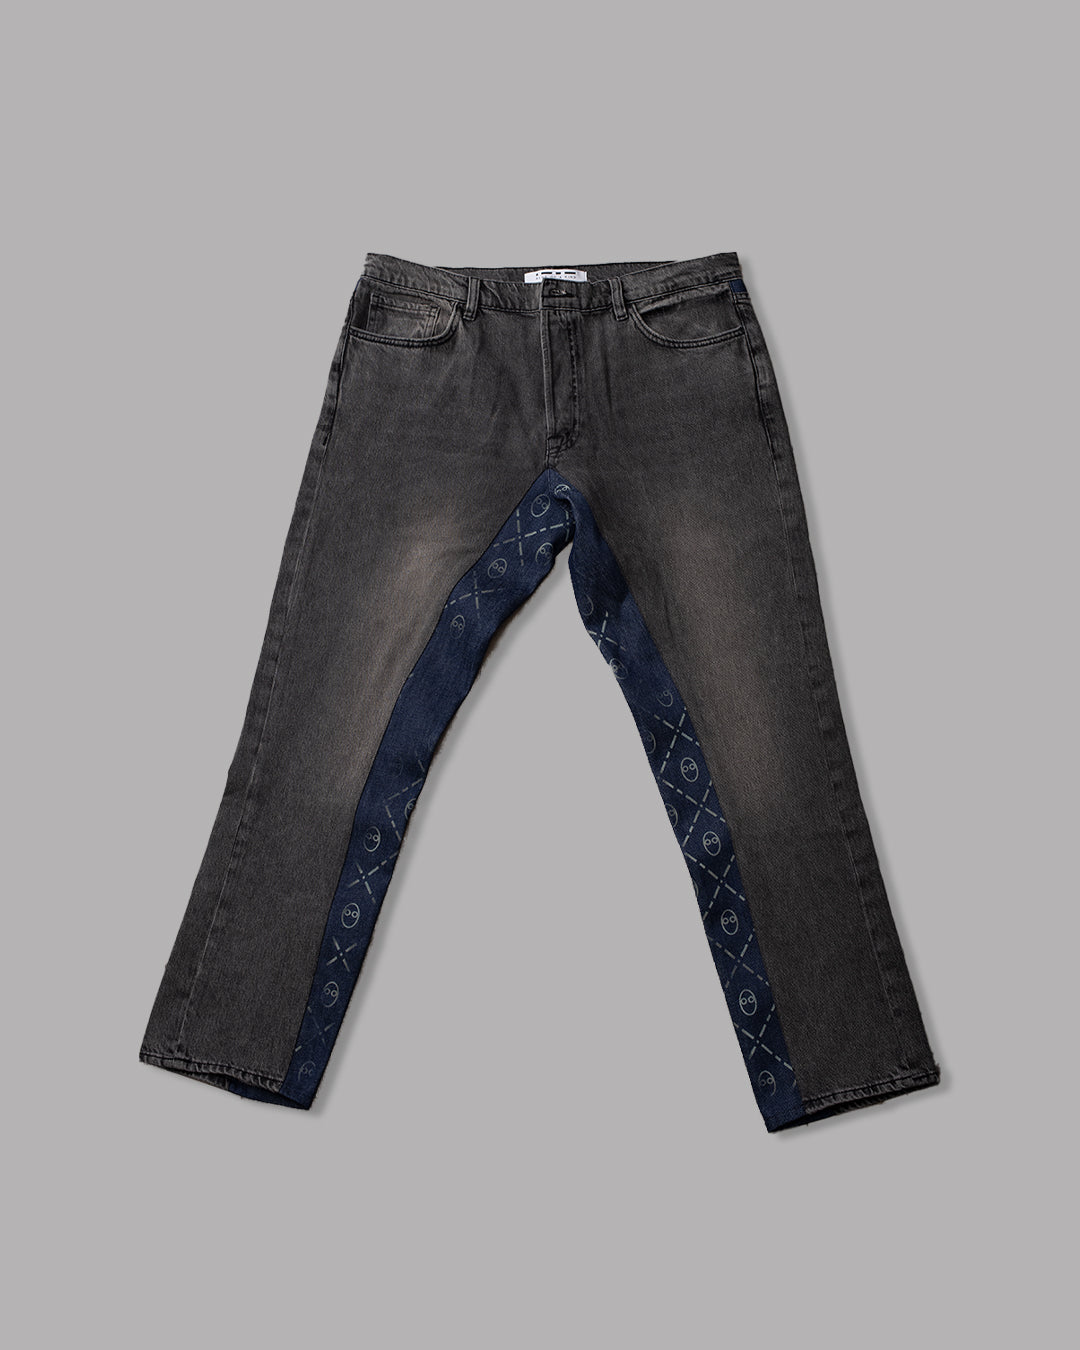 Nocturnal apollo BK + Saturnino jeans - upcycled garment